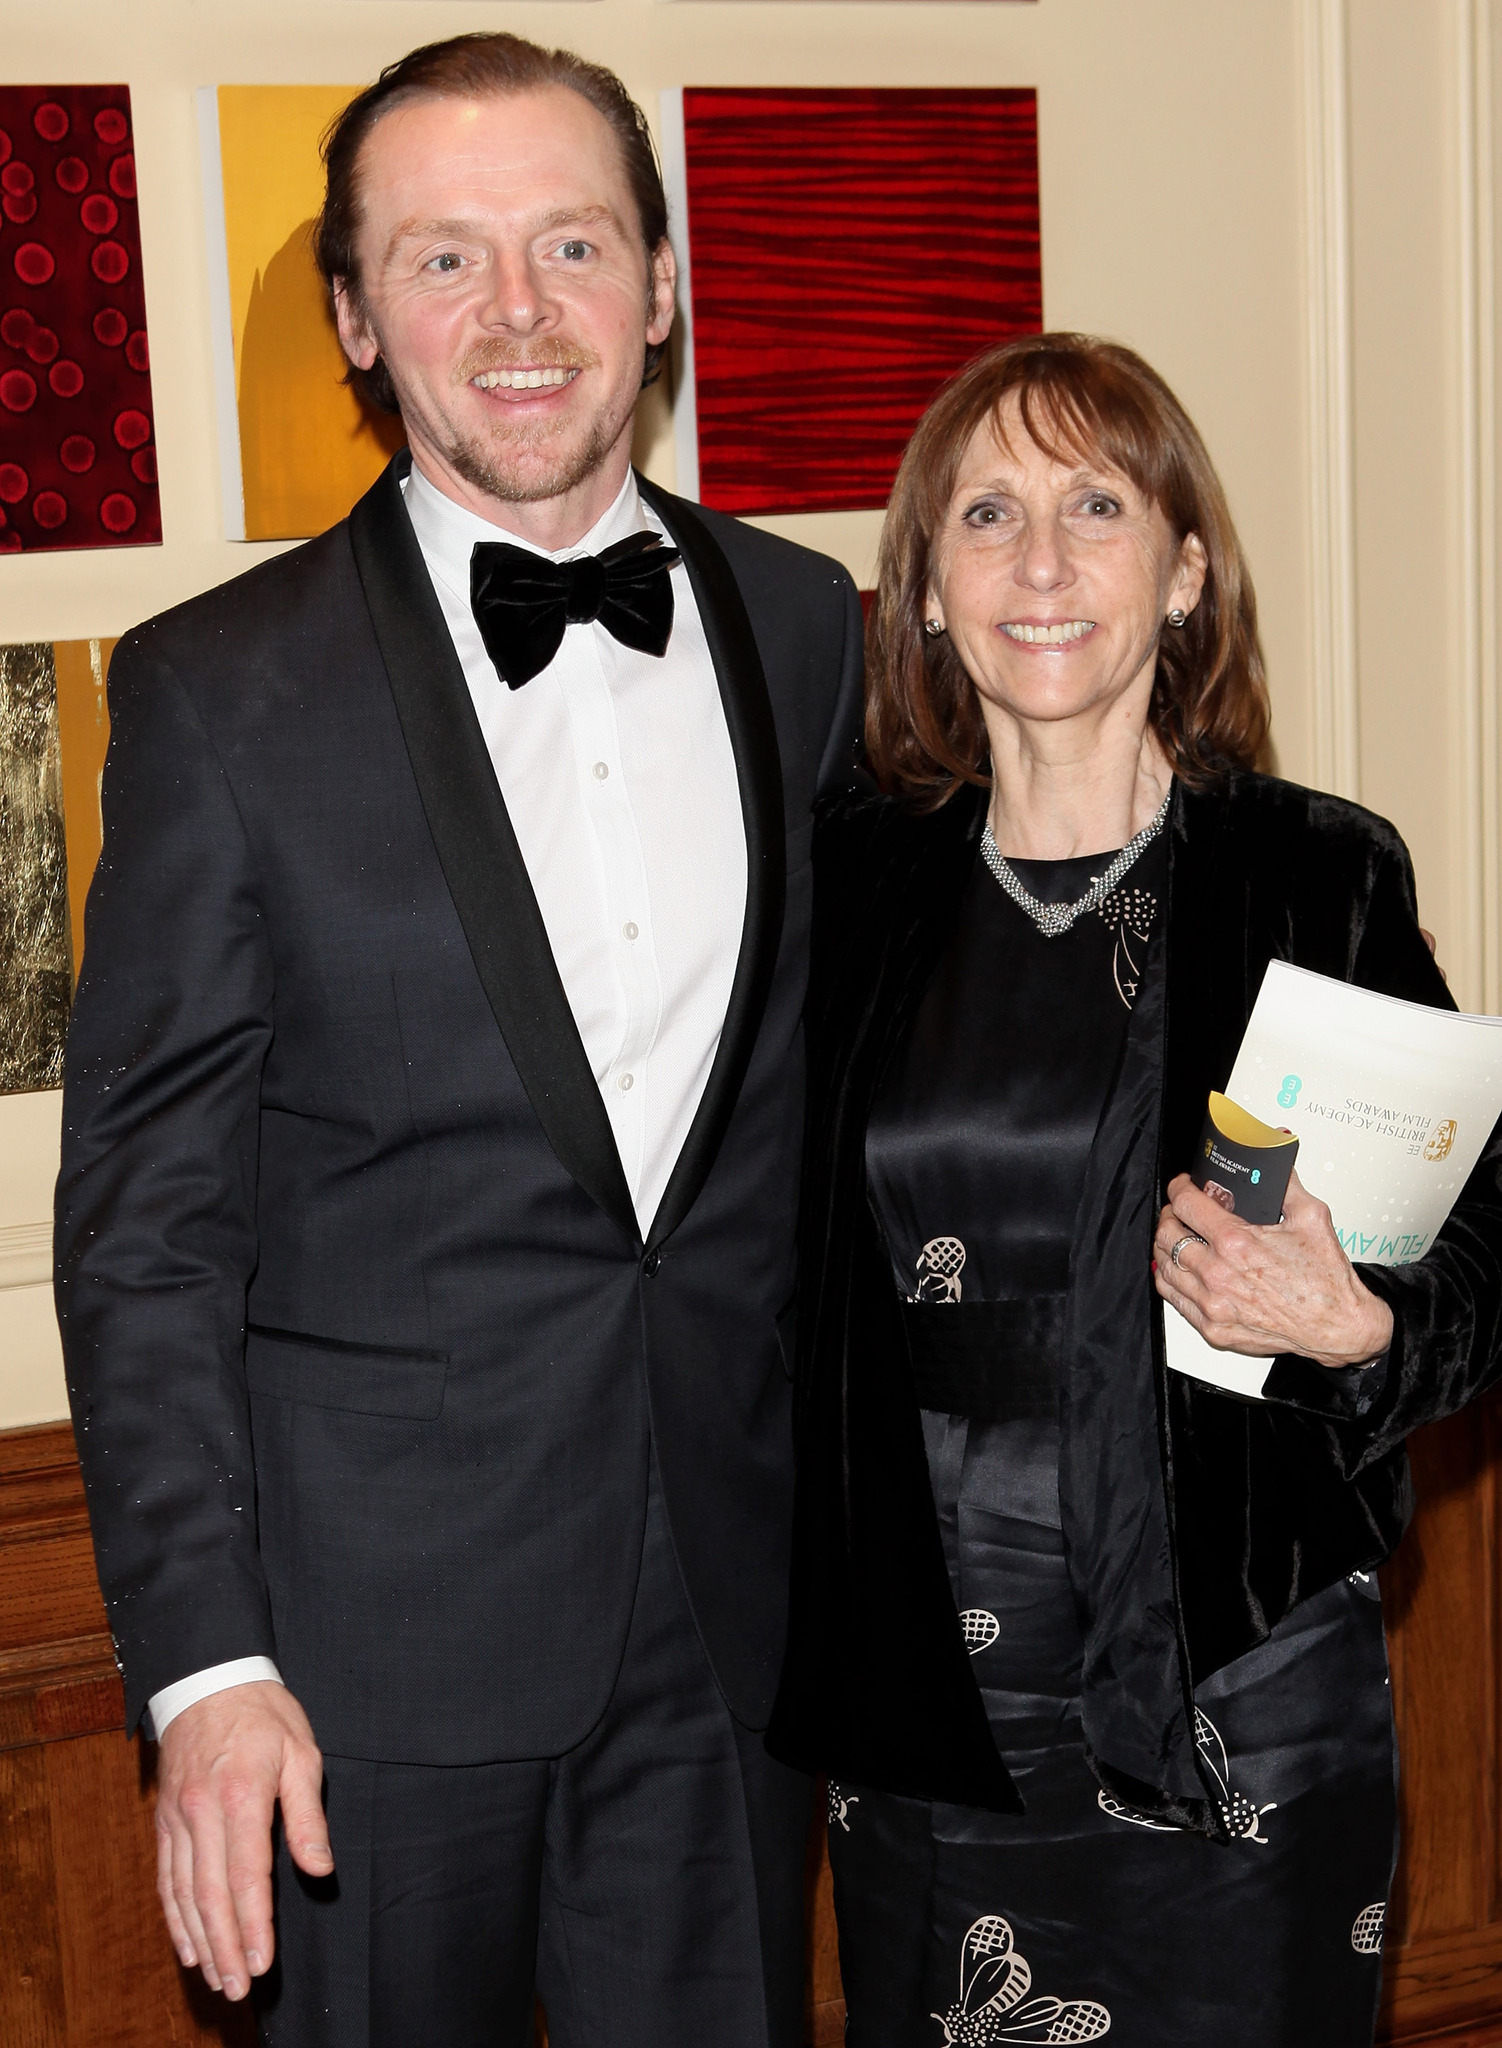 Simon Pegg (L) and mother Gillian arrive at the after party following the EE British Academy Film Awards at Grosvenor House on February 10, 2013 in London, England.